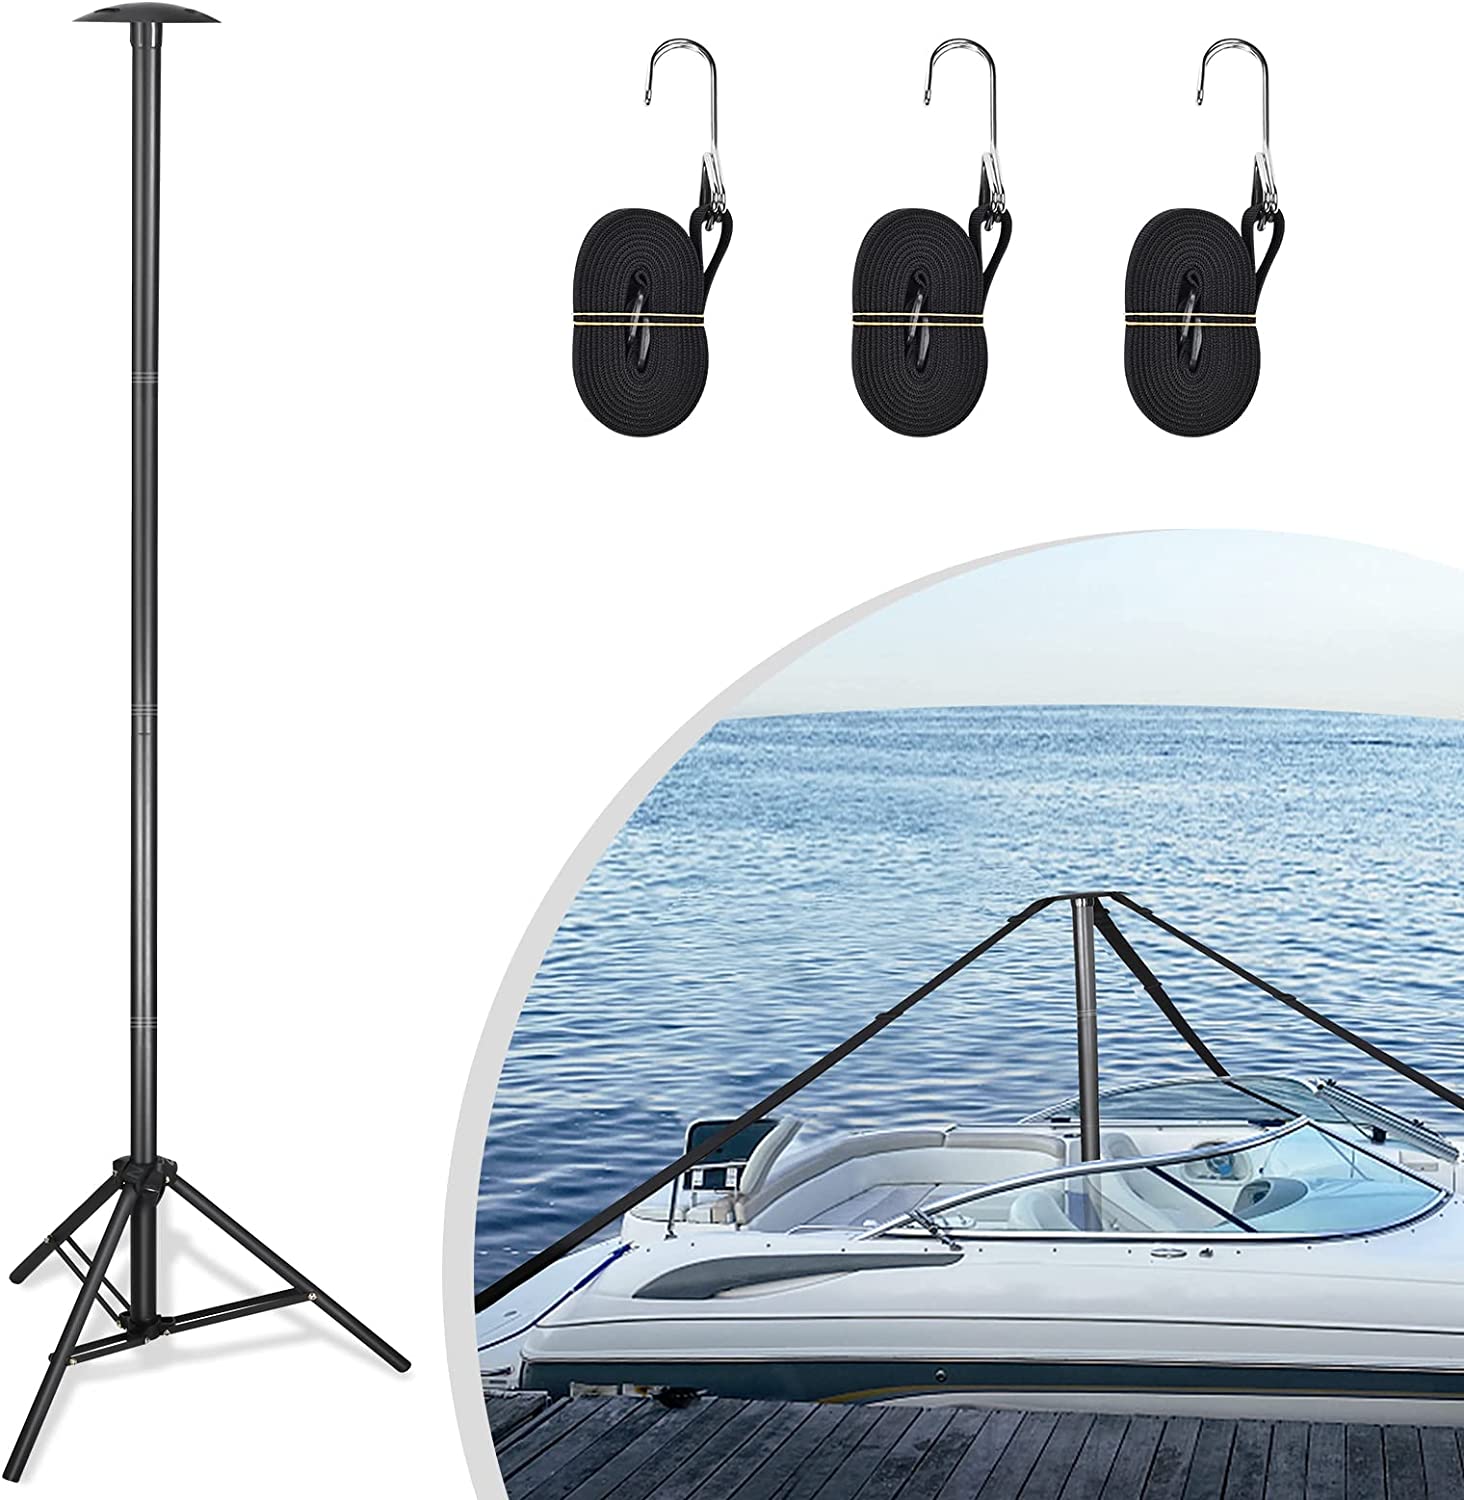 DACK Boat Cover Support Poles Stand System,Pontoon Boat Cover Support with Metal Tripod Base,27-59 inch Boat Cover Poles Adjustable with 3 Straps